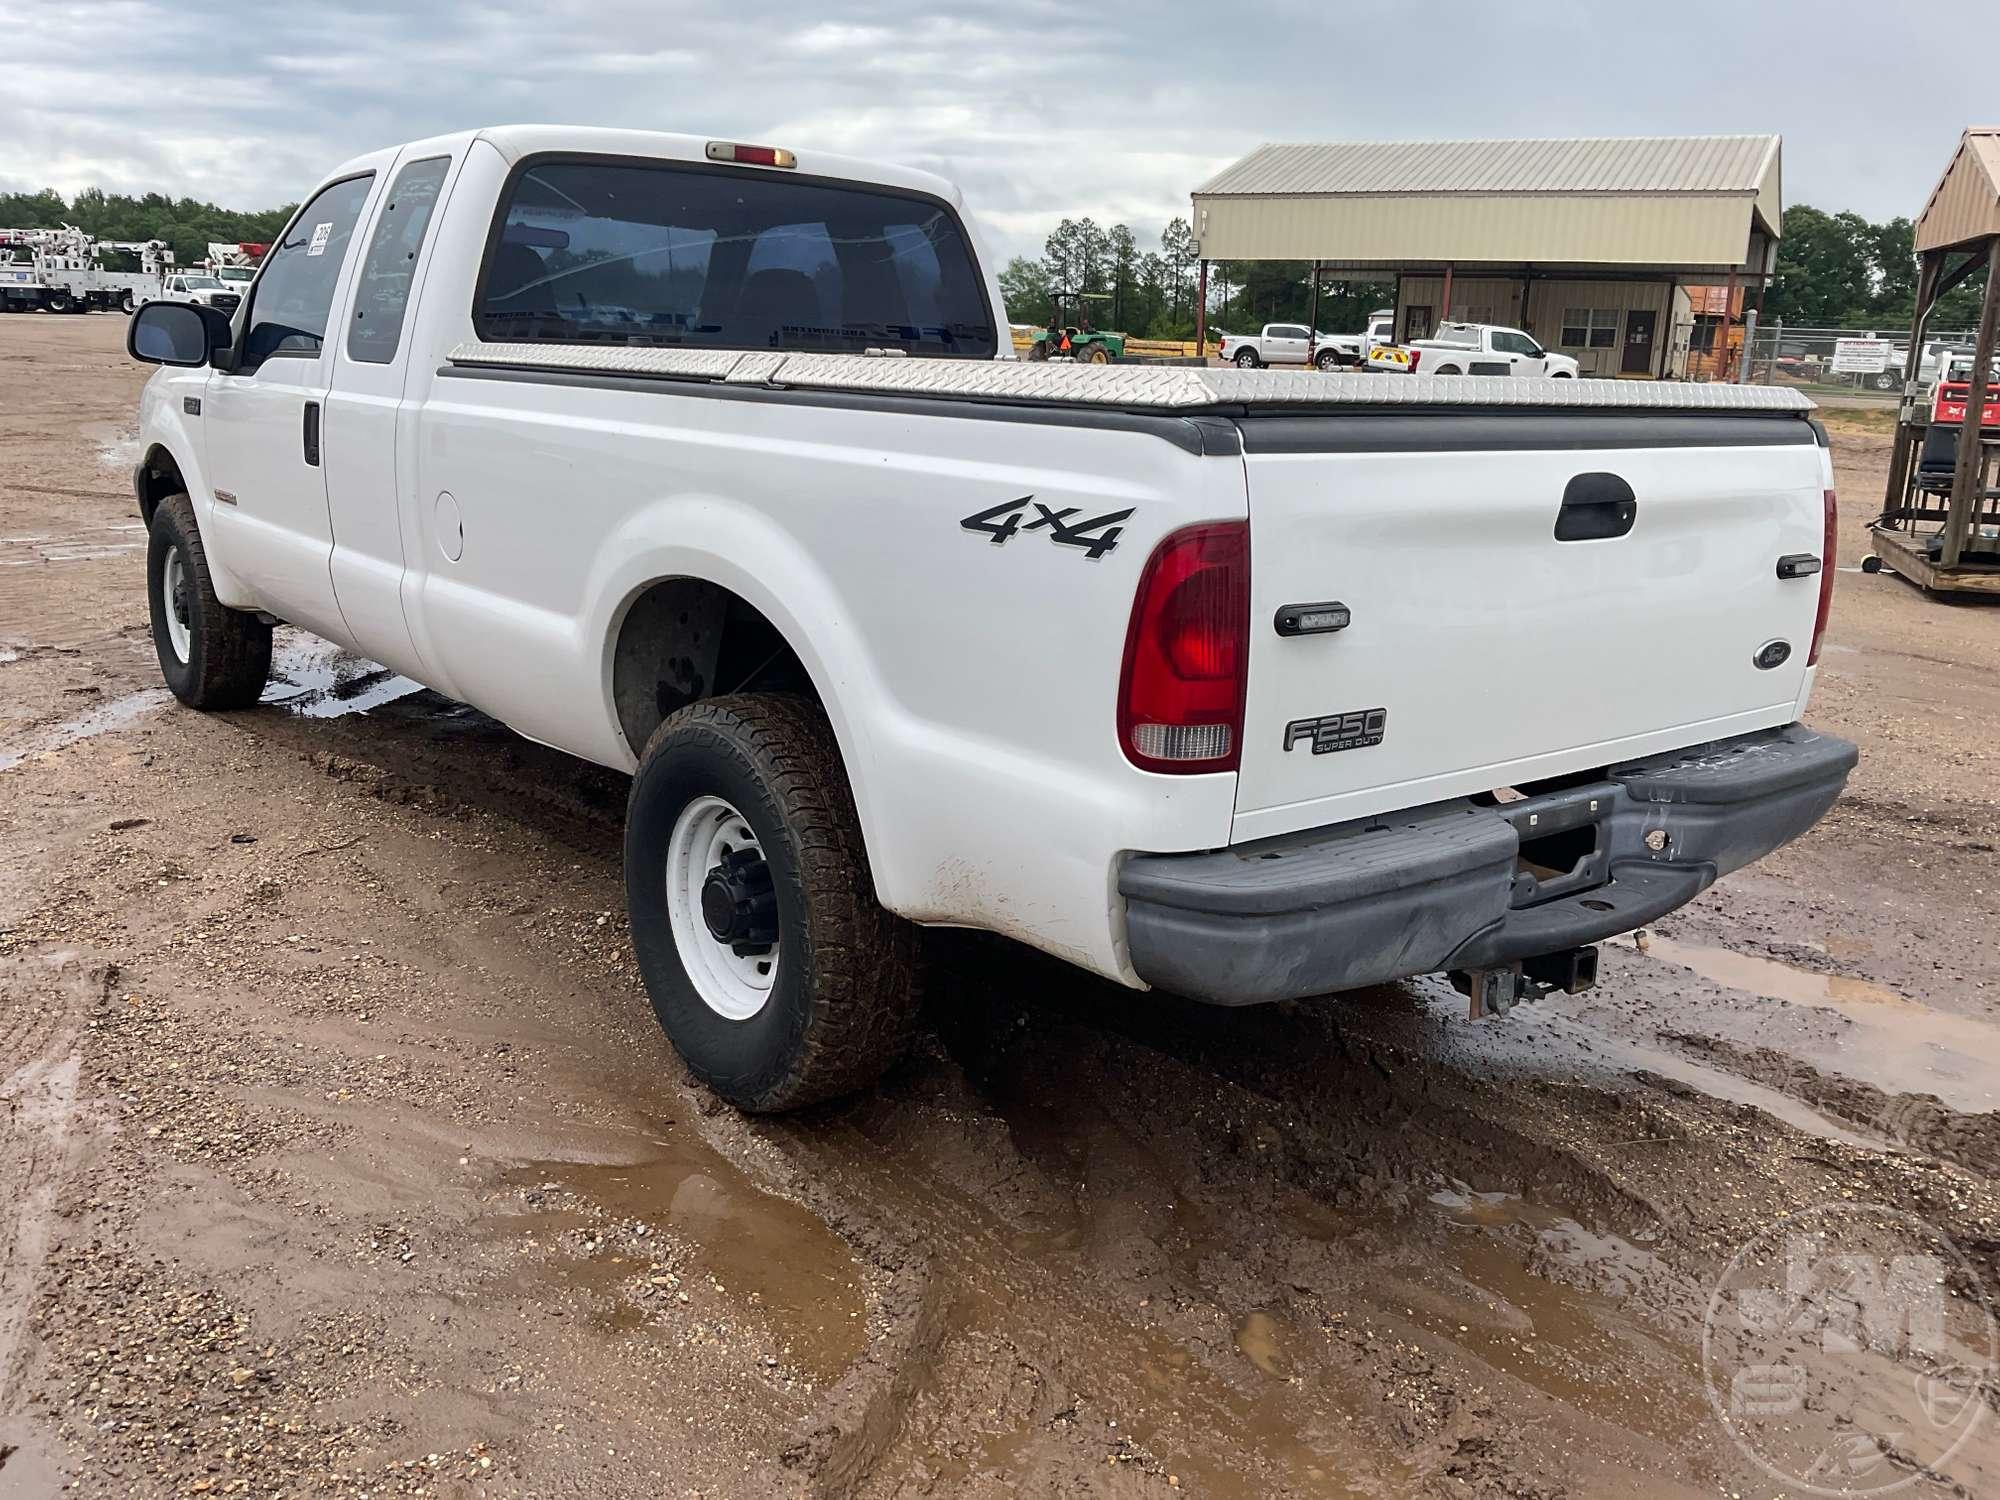 2003 FORD F-250 SUPER DUTY EXTENDED CAB 4X4 PICKUP VIN: 1FTNX21P53EC28401